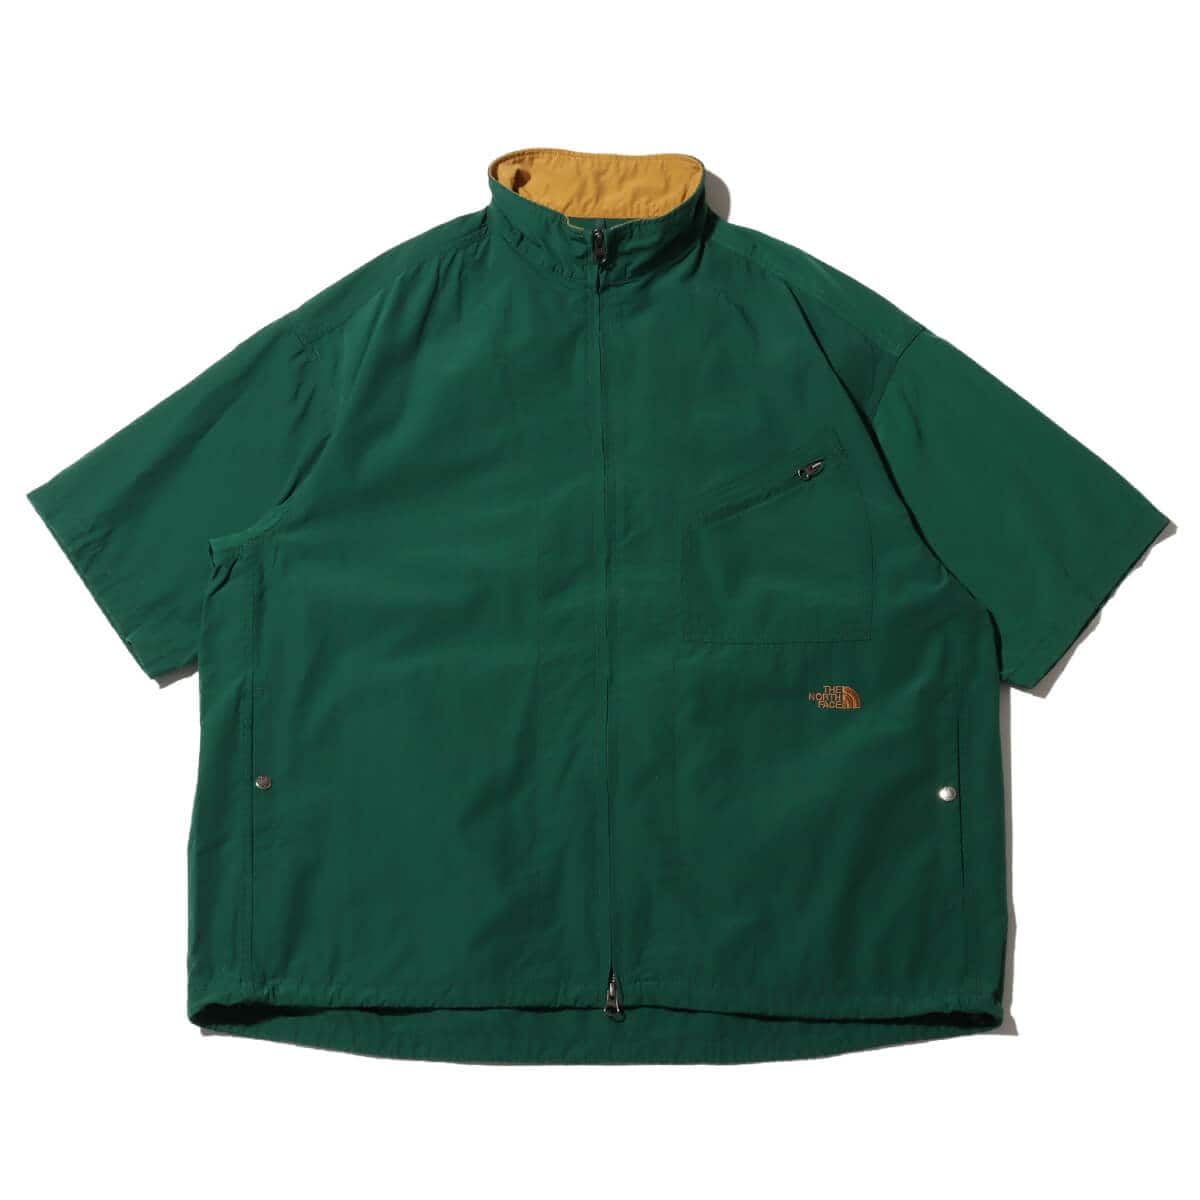 THE NORTH FACE PURPLE LABEL Field Short Sleeve Jacket Spruce